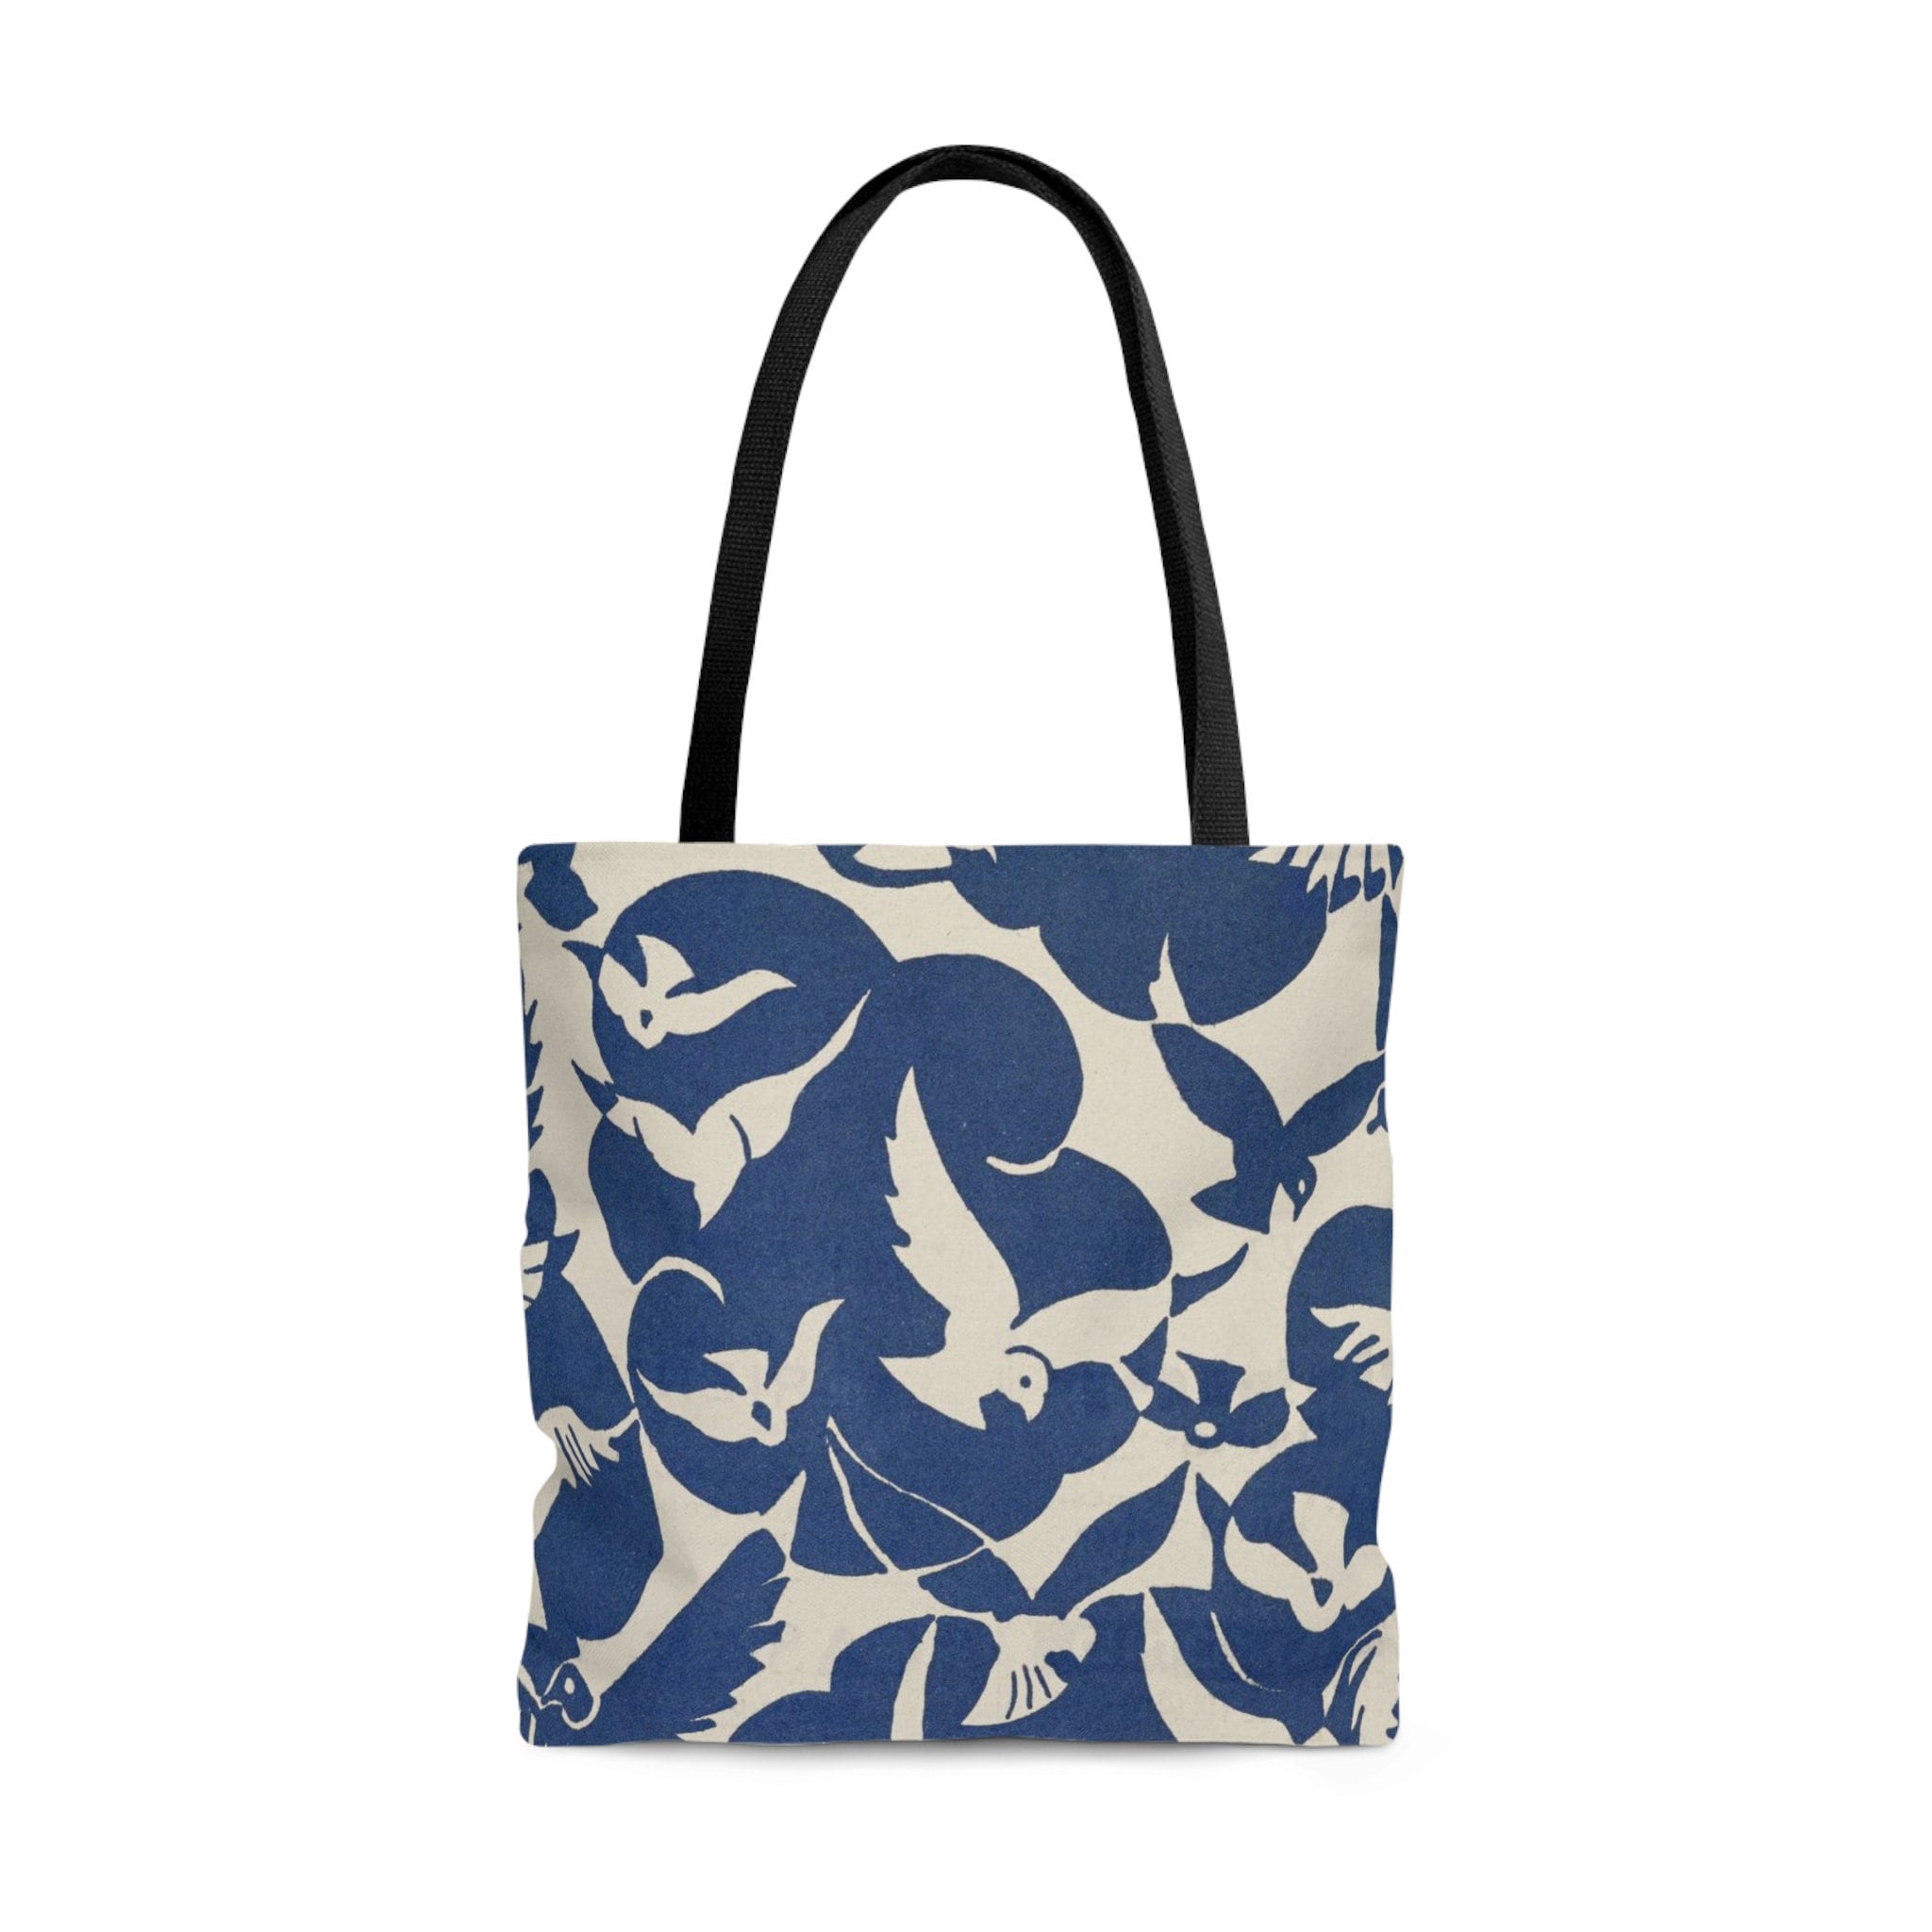 Polyester Canvas Sublimation Tote Bags Choose Your Size: 12.5 X 14 or 15.75  X 16. Sublimate on One or Both Sides 